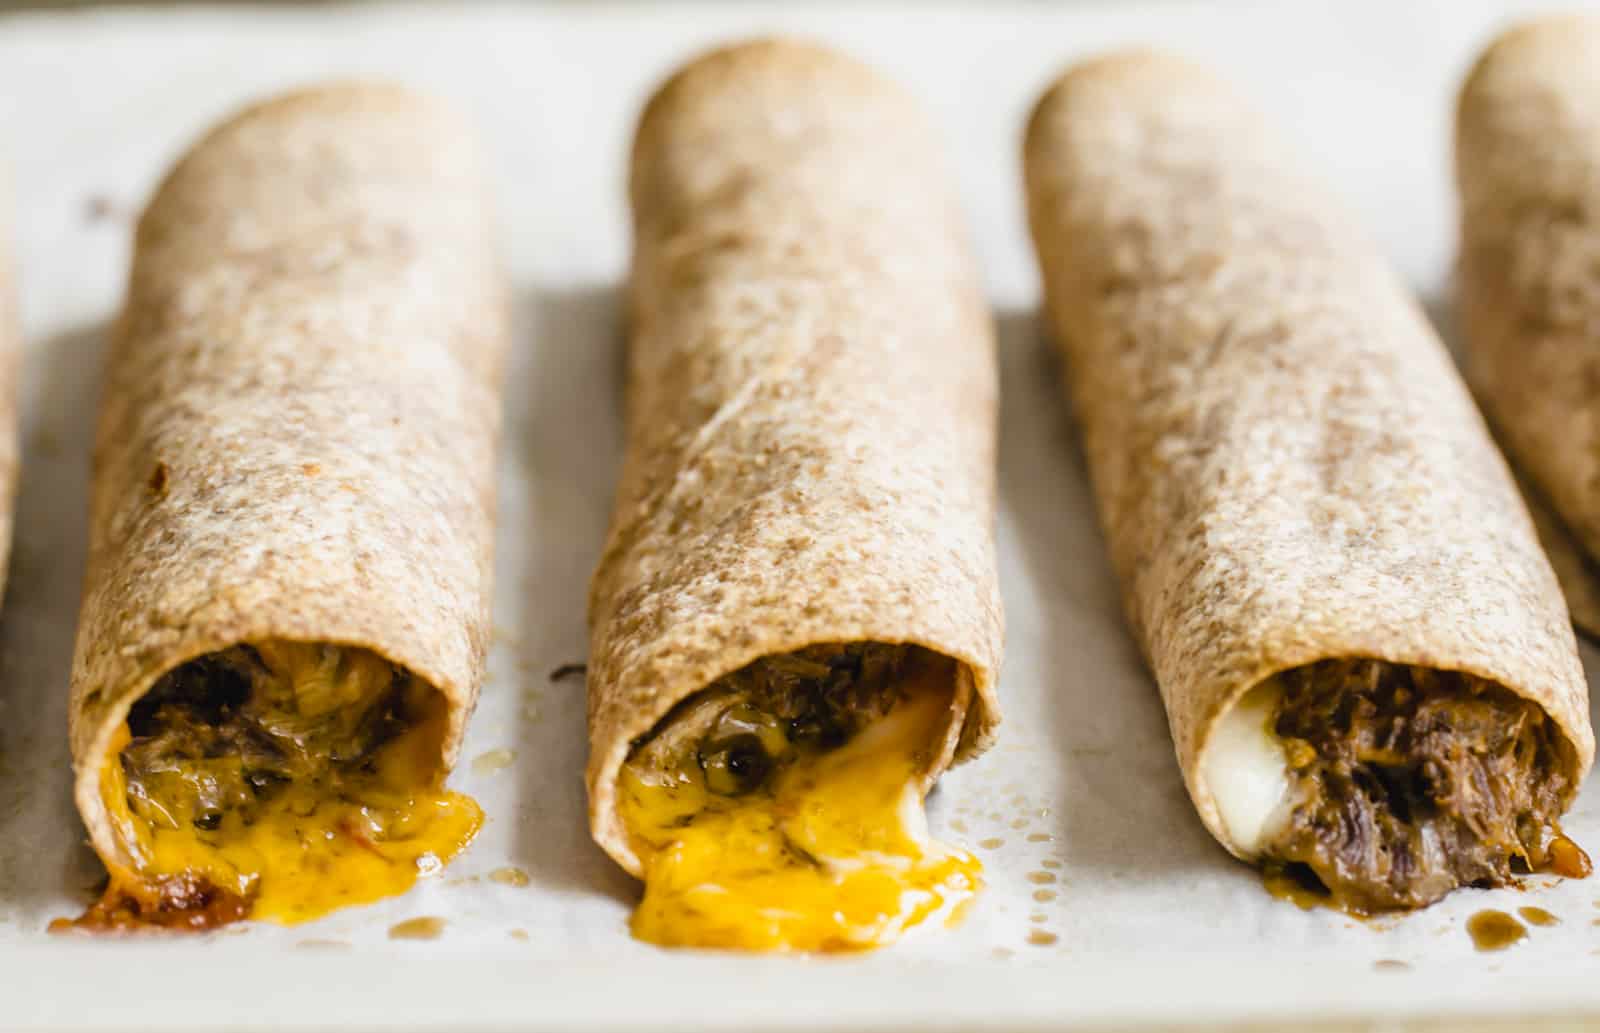 Three shredded beef taquitos lined up on a baking sheet with melted cheese spilling out.